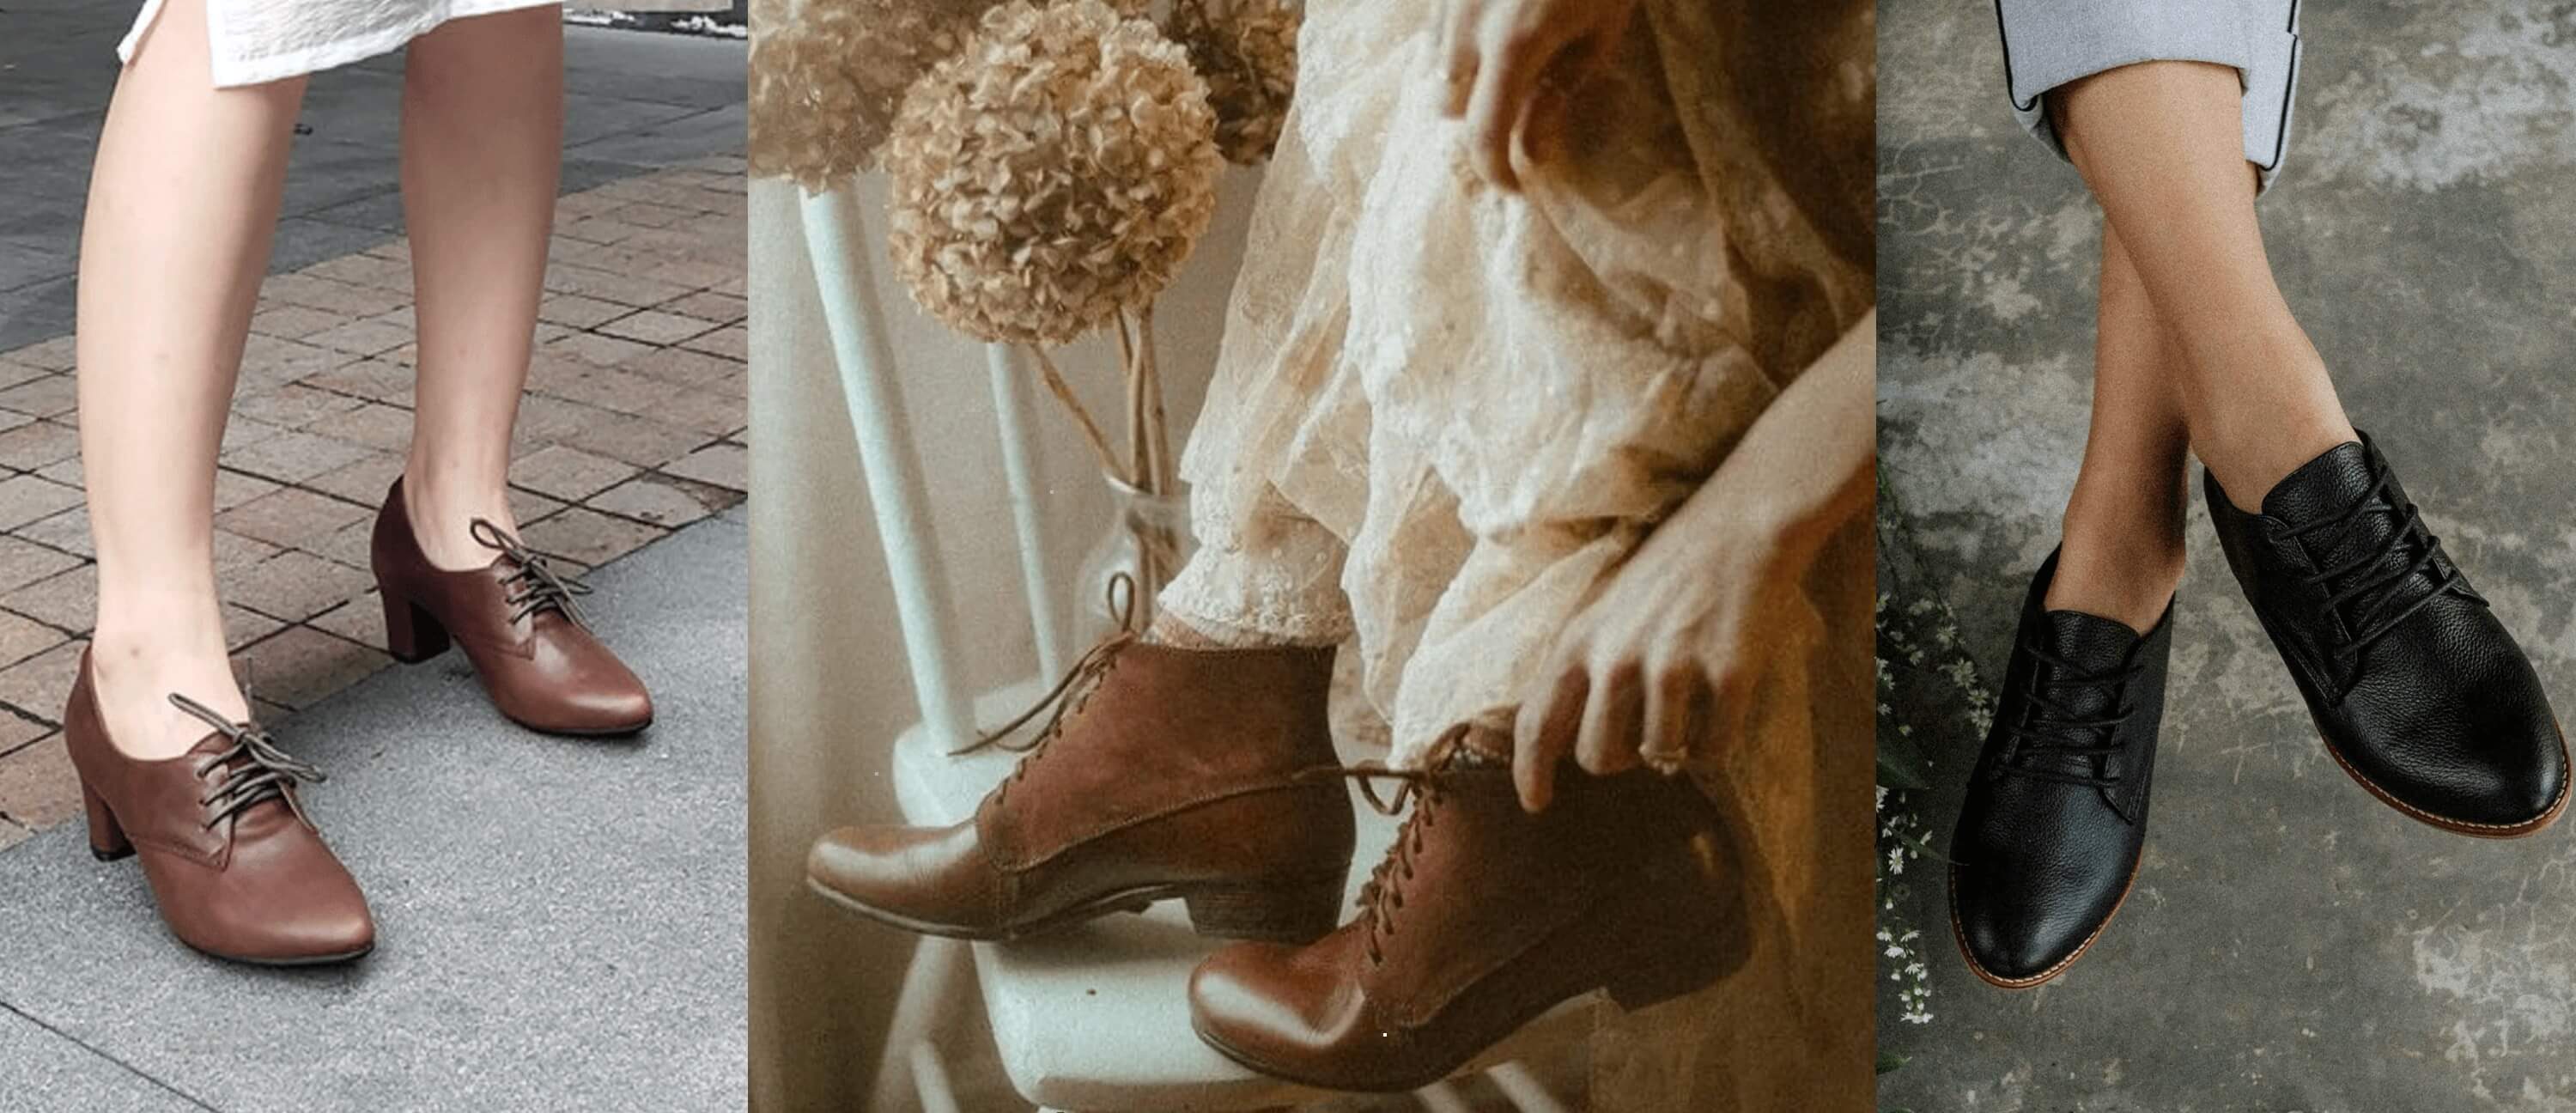 Cottagecore Shoes: What to look for the get the vibe right